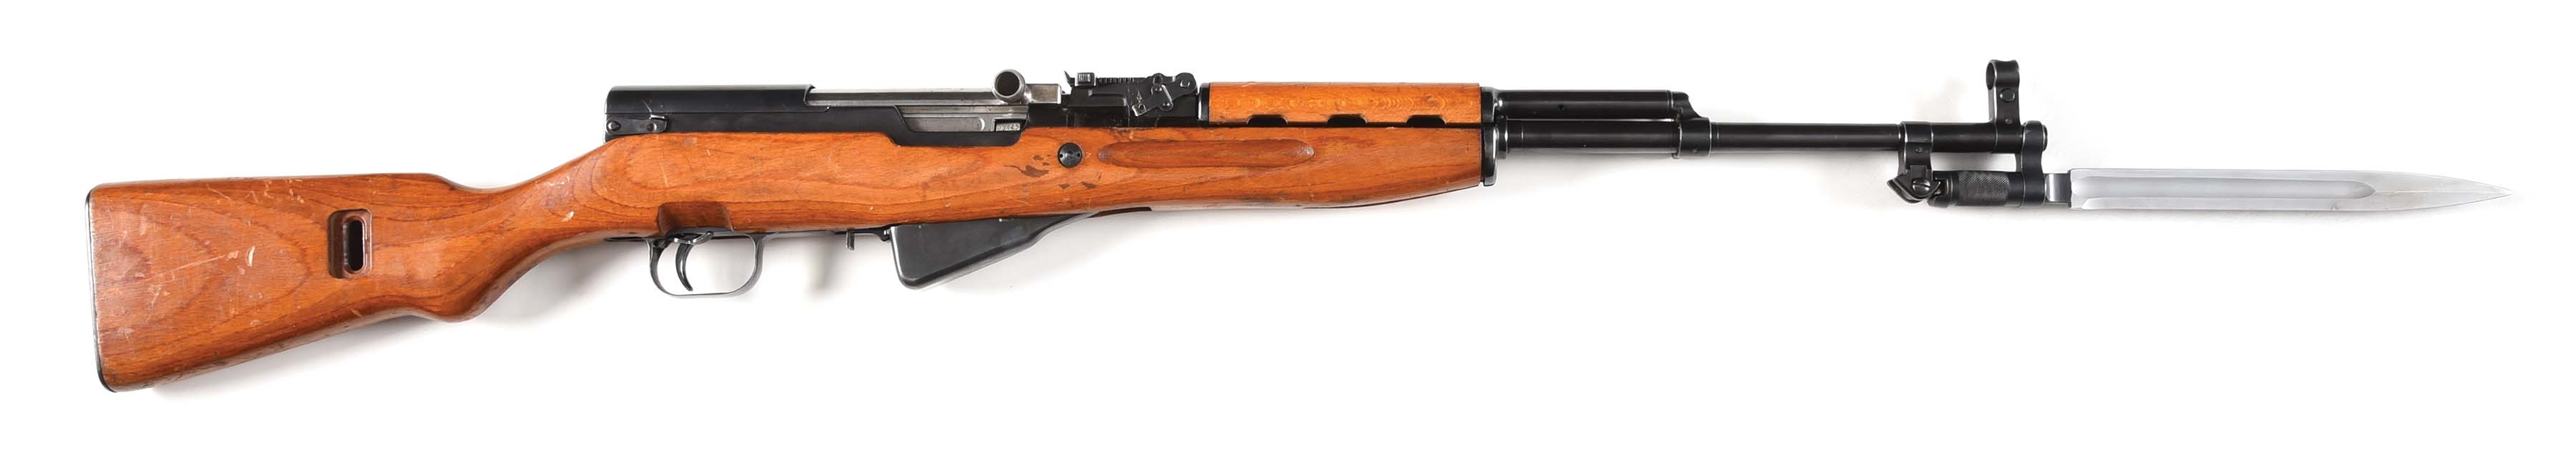 (C) EXCEPTIONALLY SCARCE & DESIRABLE EAST GERMAN SKS SEMI-AUTOMATIC RIFLE.